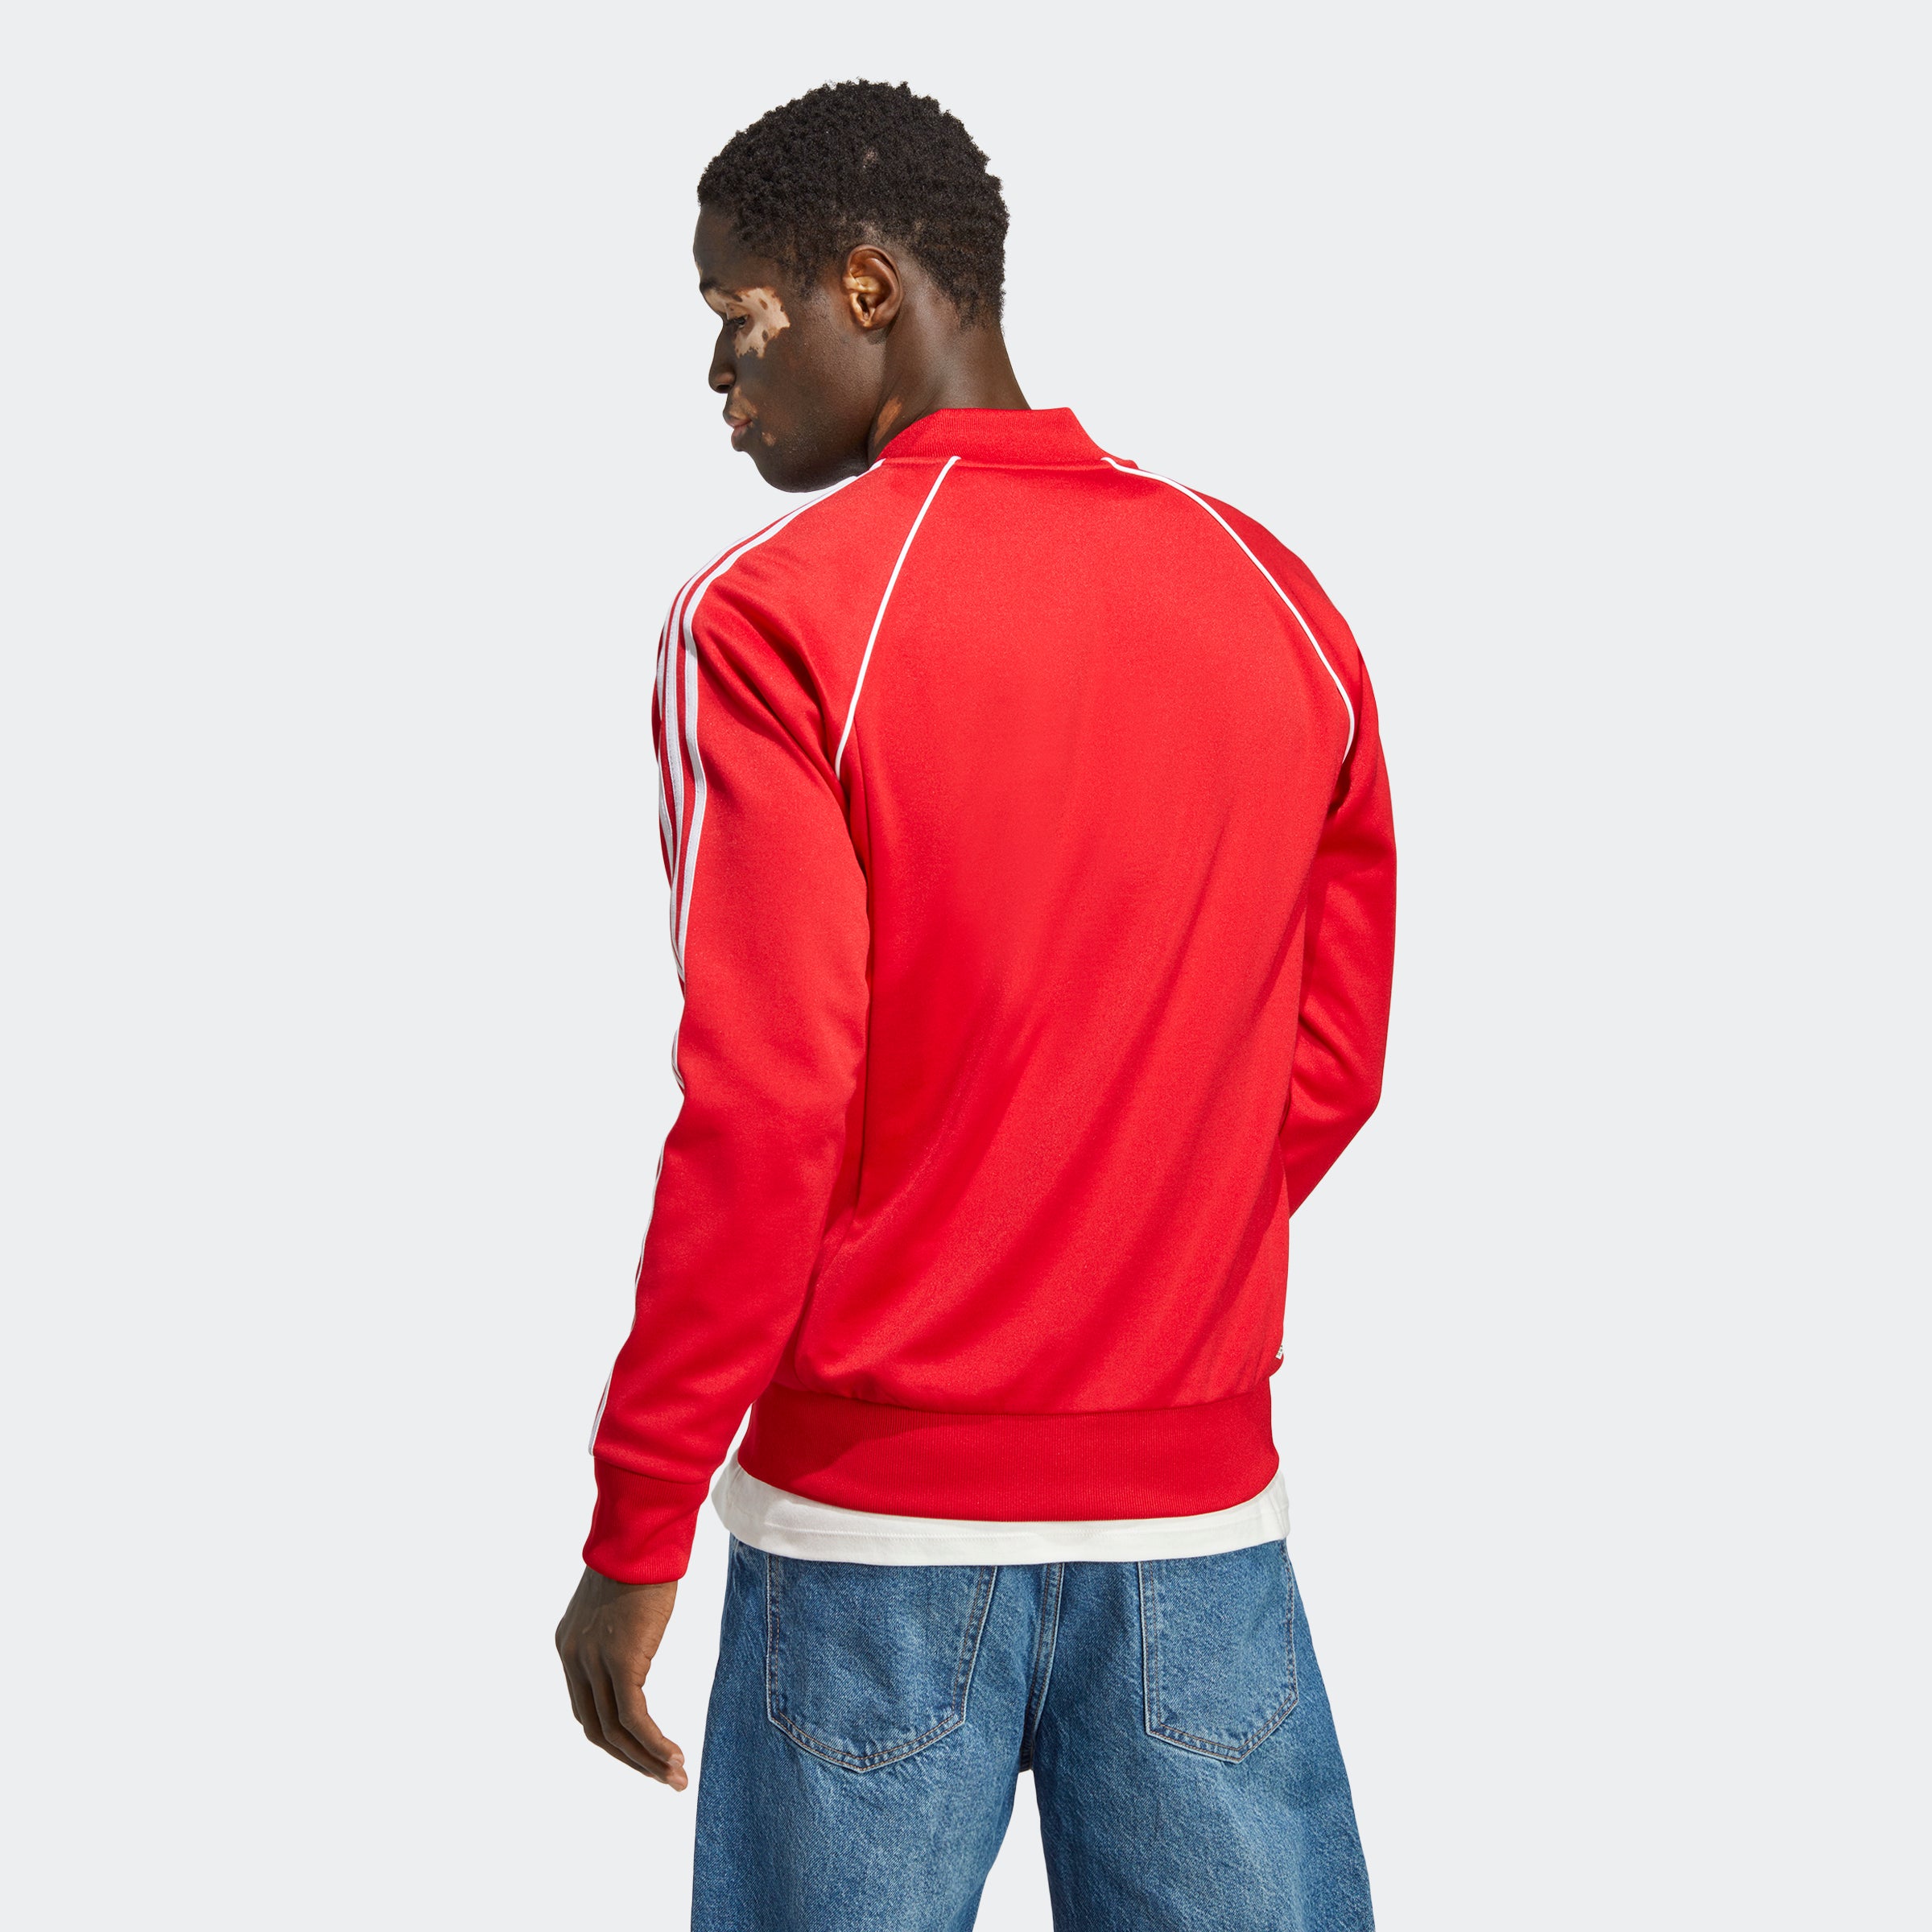 Red | Sports Jacket Classics Chicago Track City SST adidas Adicolor